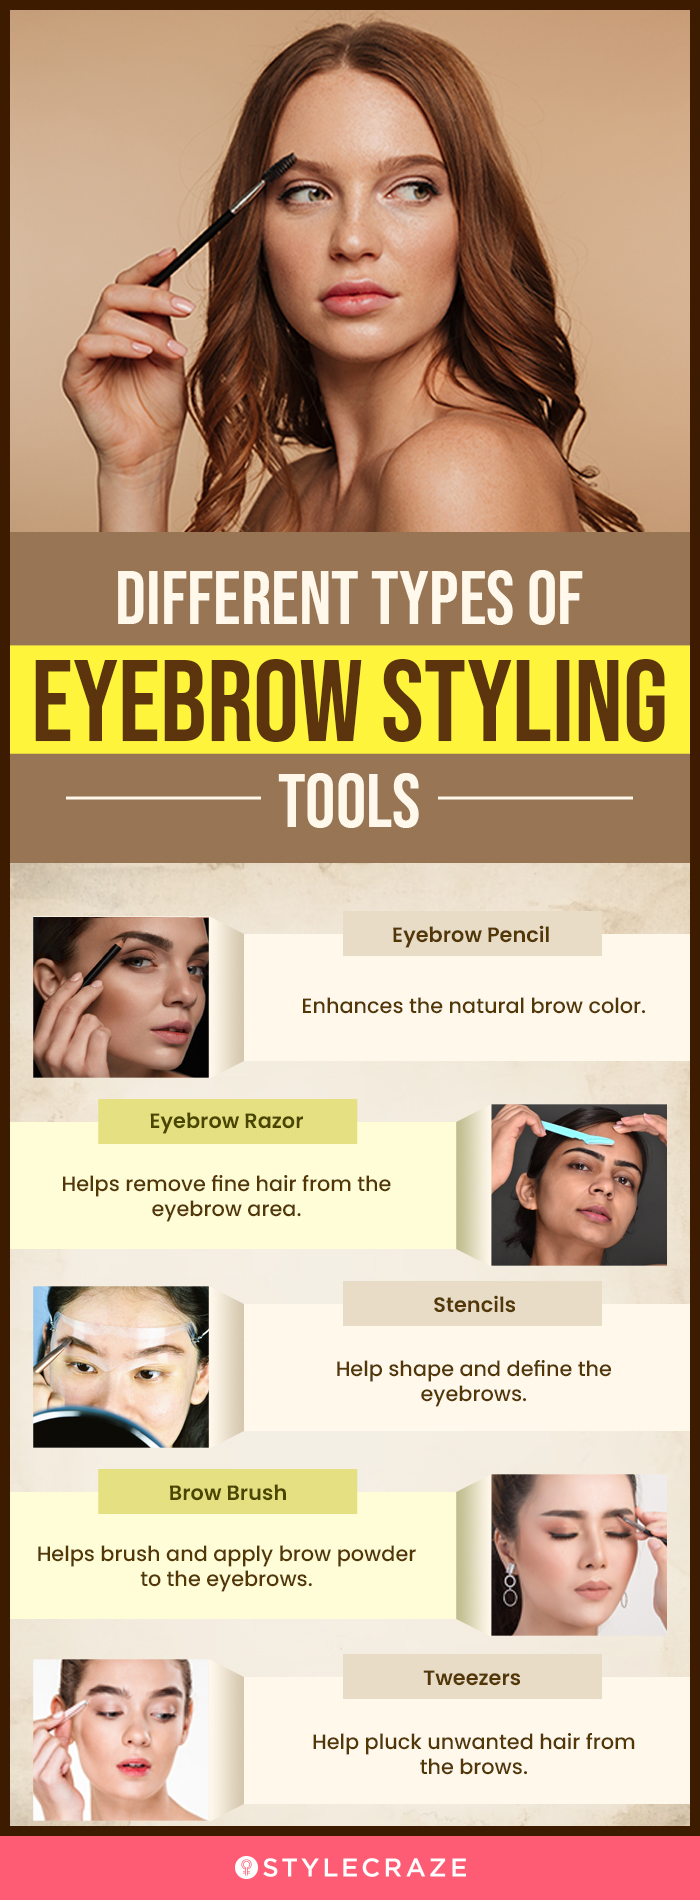 How to Find the Best Eyebrow Shape for Your Face